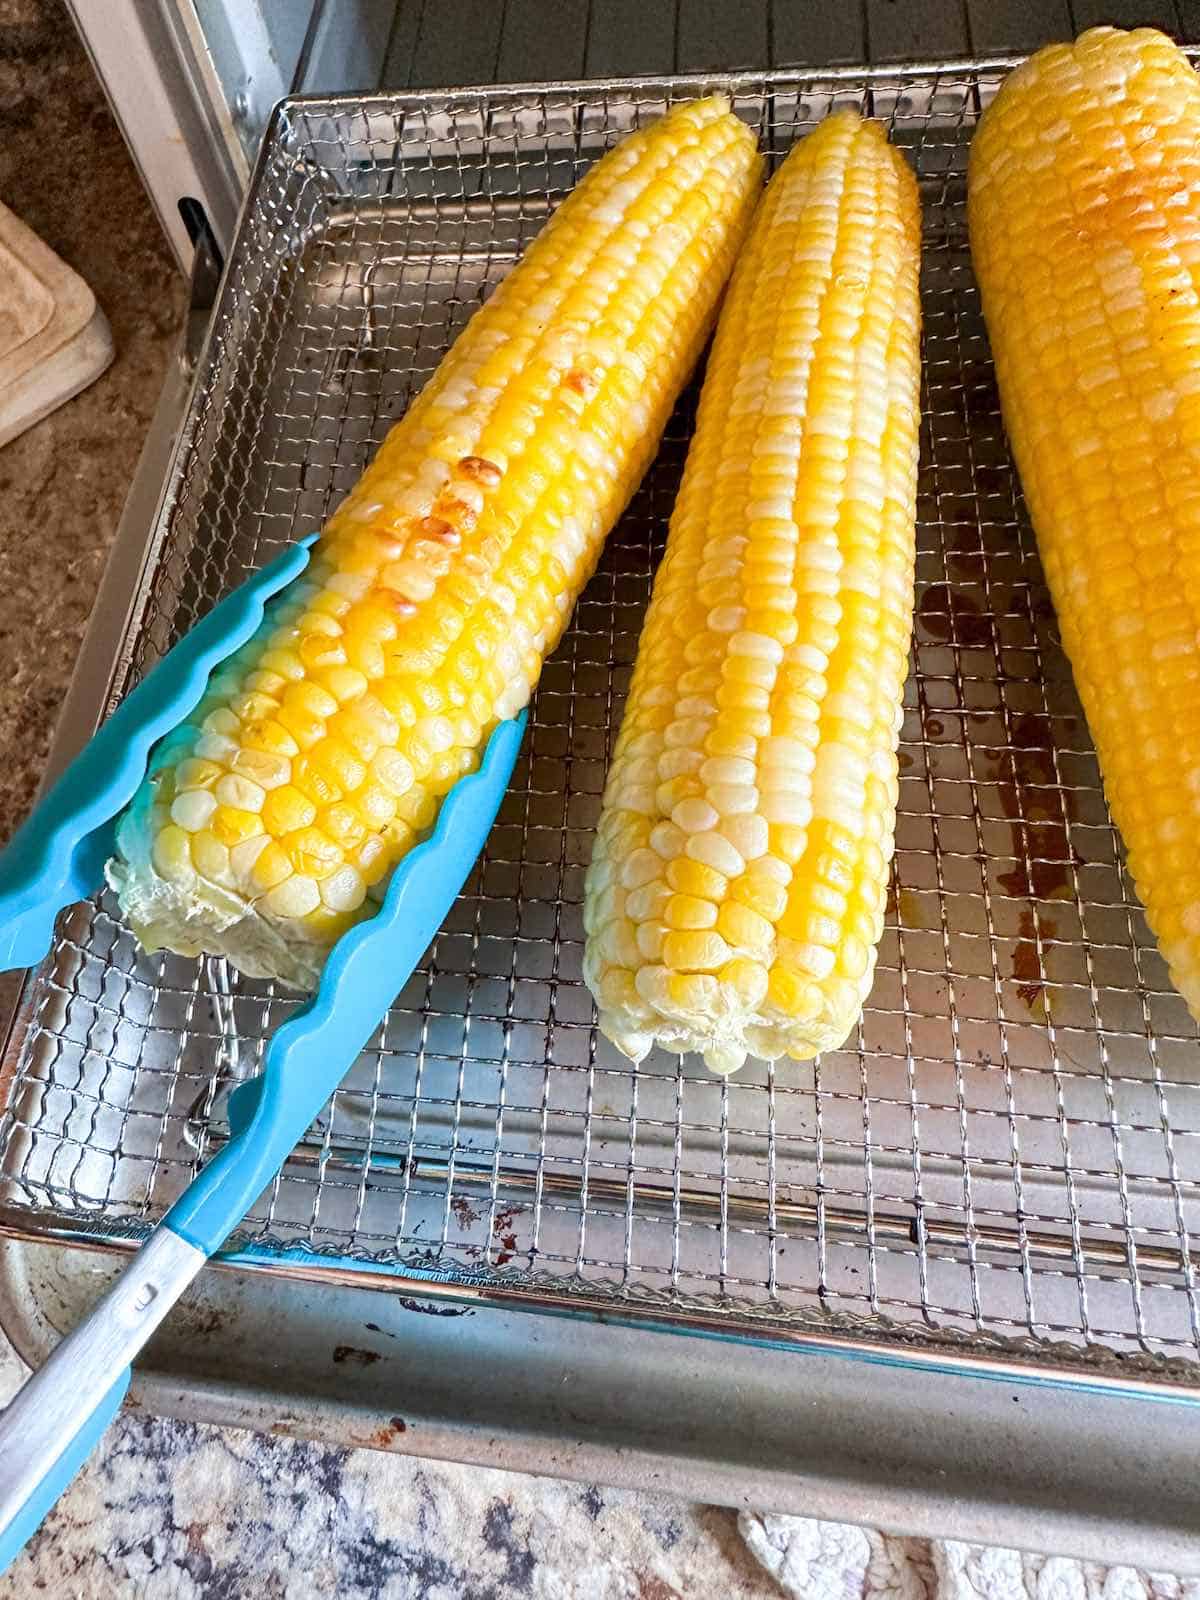 Slightly charred sweet corn in the air fryer being turned over with tongs.